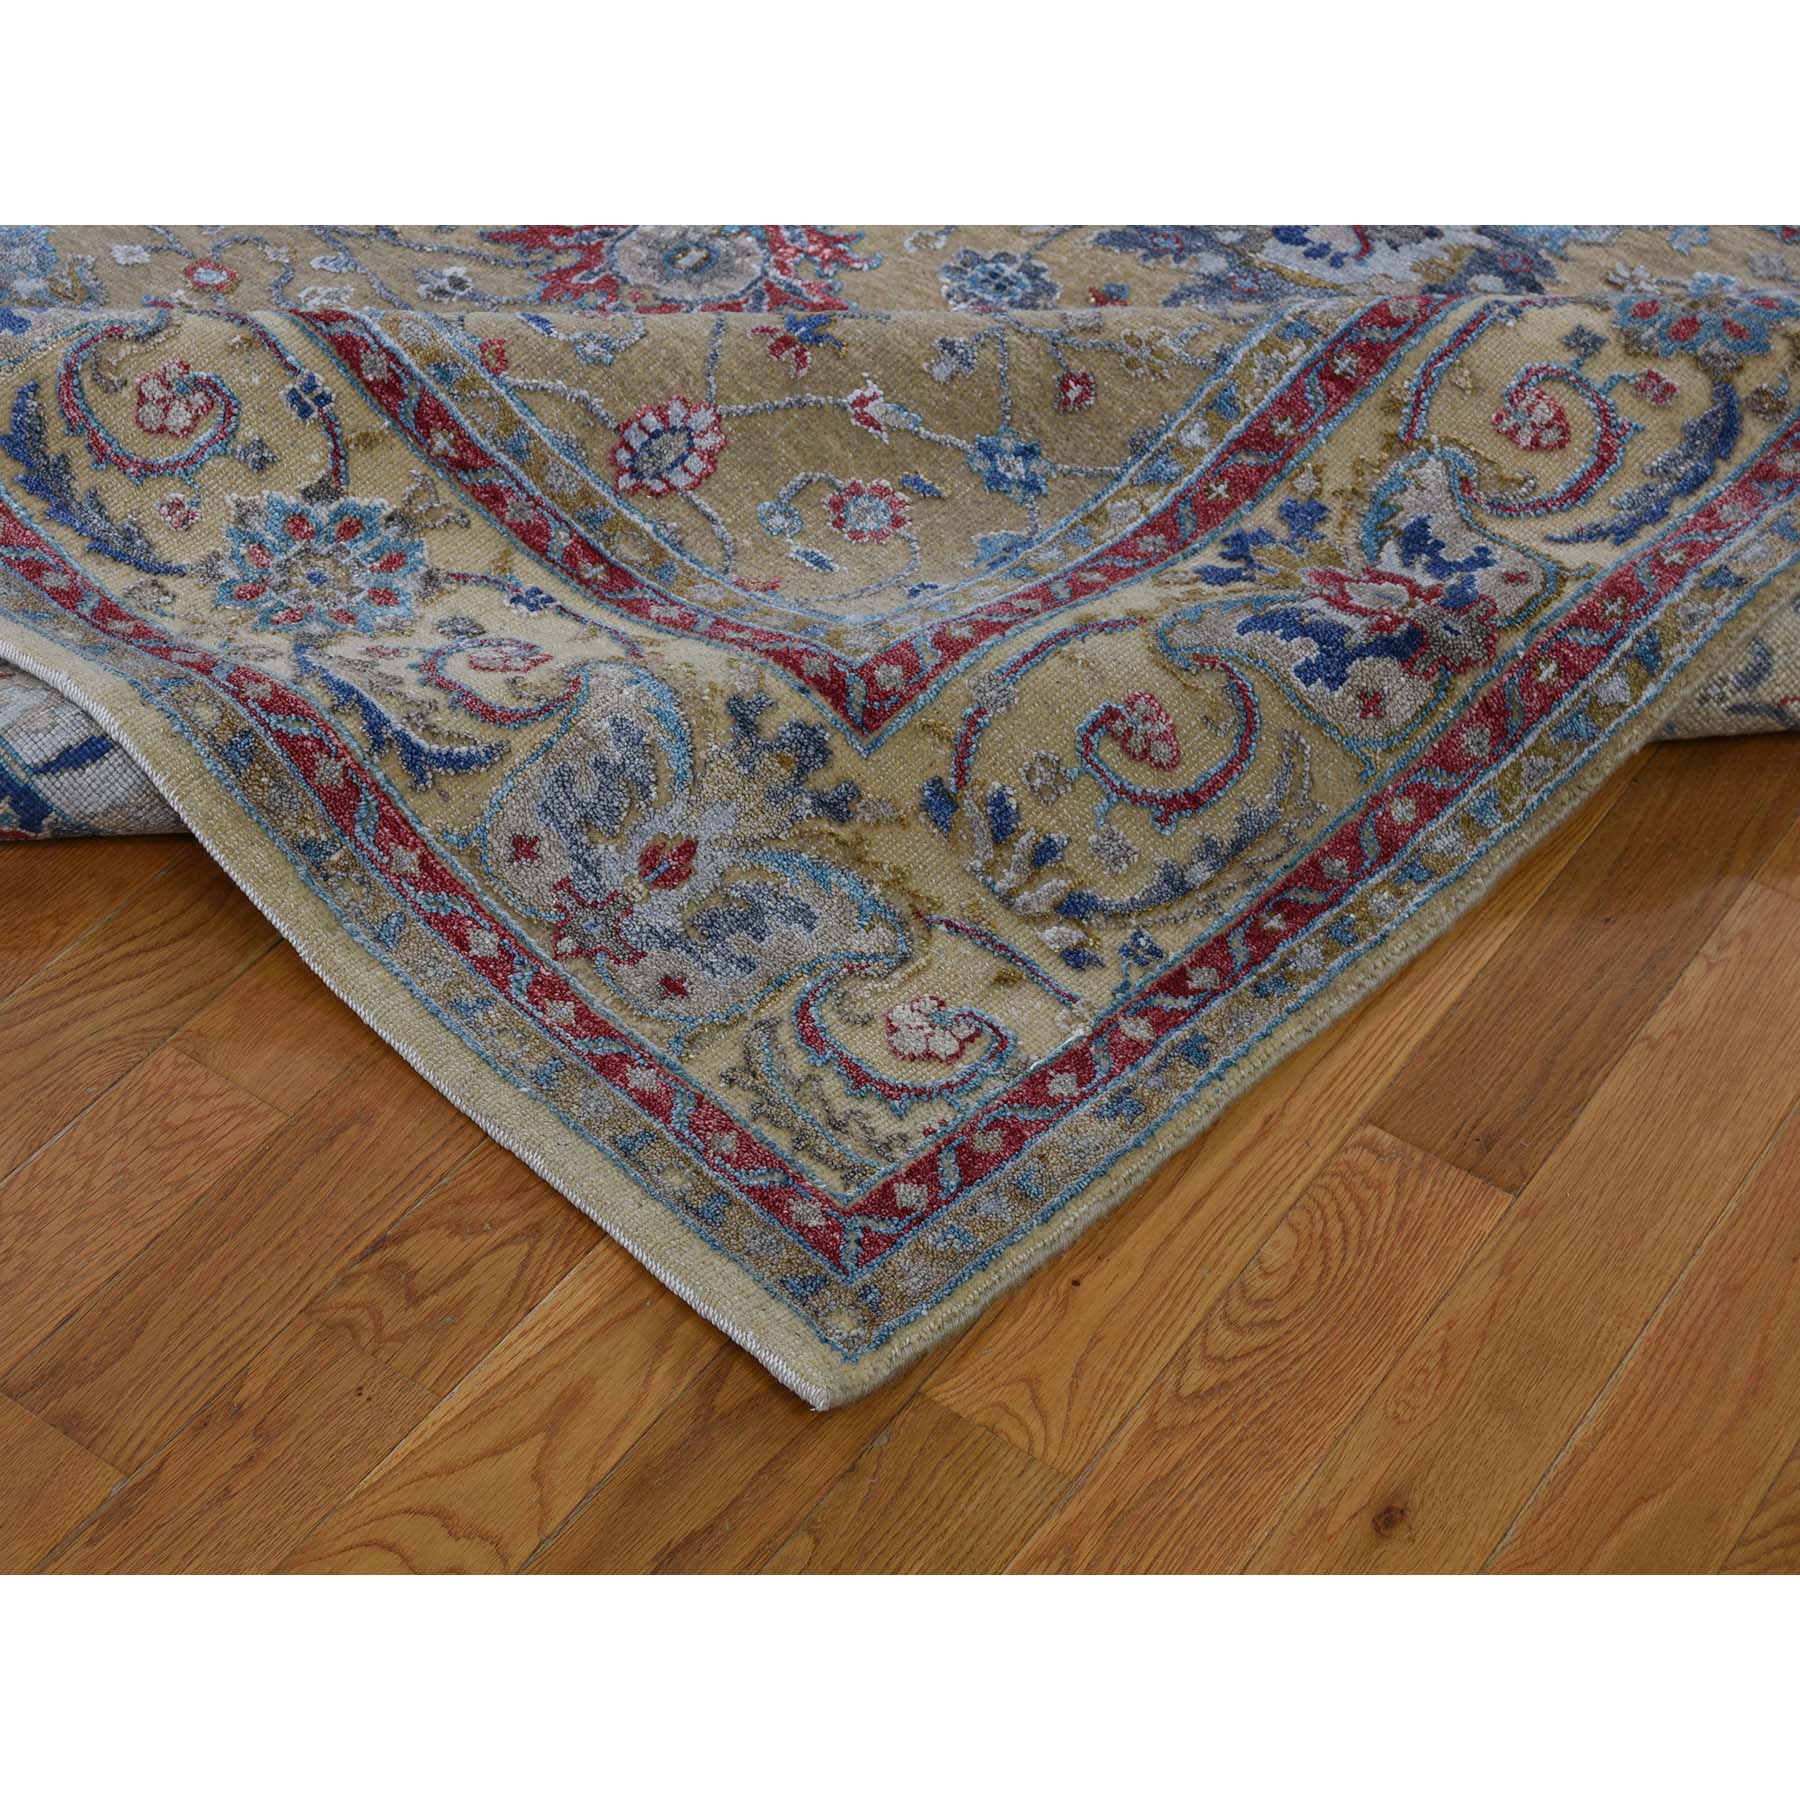 8-1 x9-7  Textured Silk With Textured Wool Mahal Design Hand-Knotted Oriental Rug 